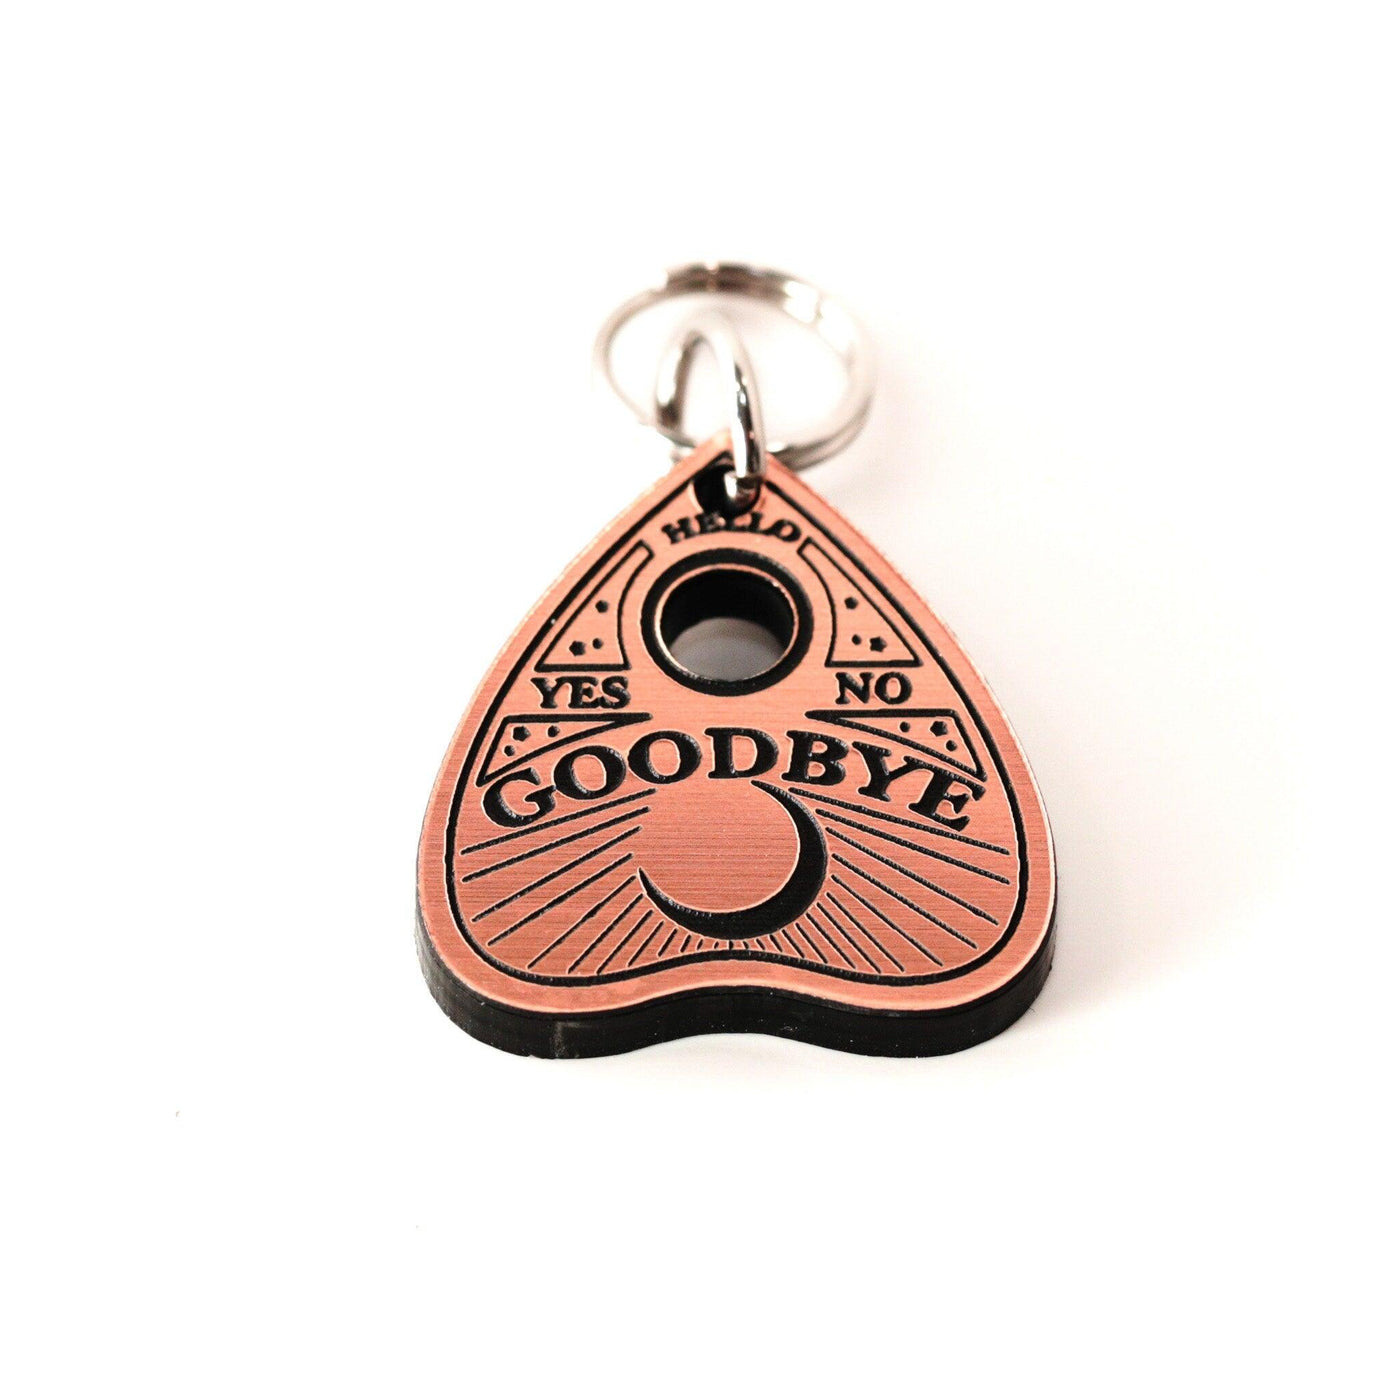 Ouija Personalized pet tag, Ouija Planchette, Personalized Pet ID Tag, Spirit Friendly, ID Tag and Dog ID Tag, Witch Pet Tag, Spooky Pet Tag